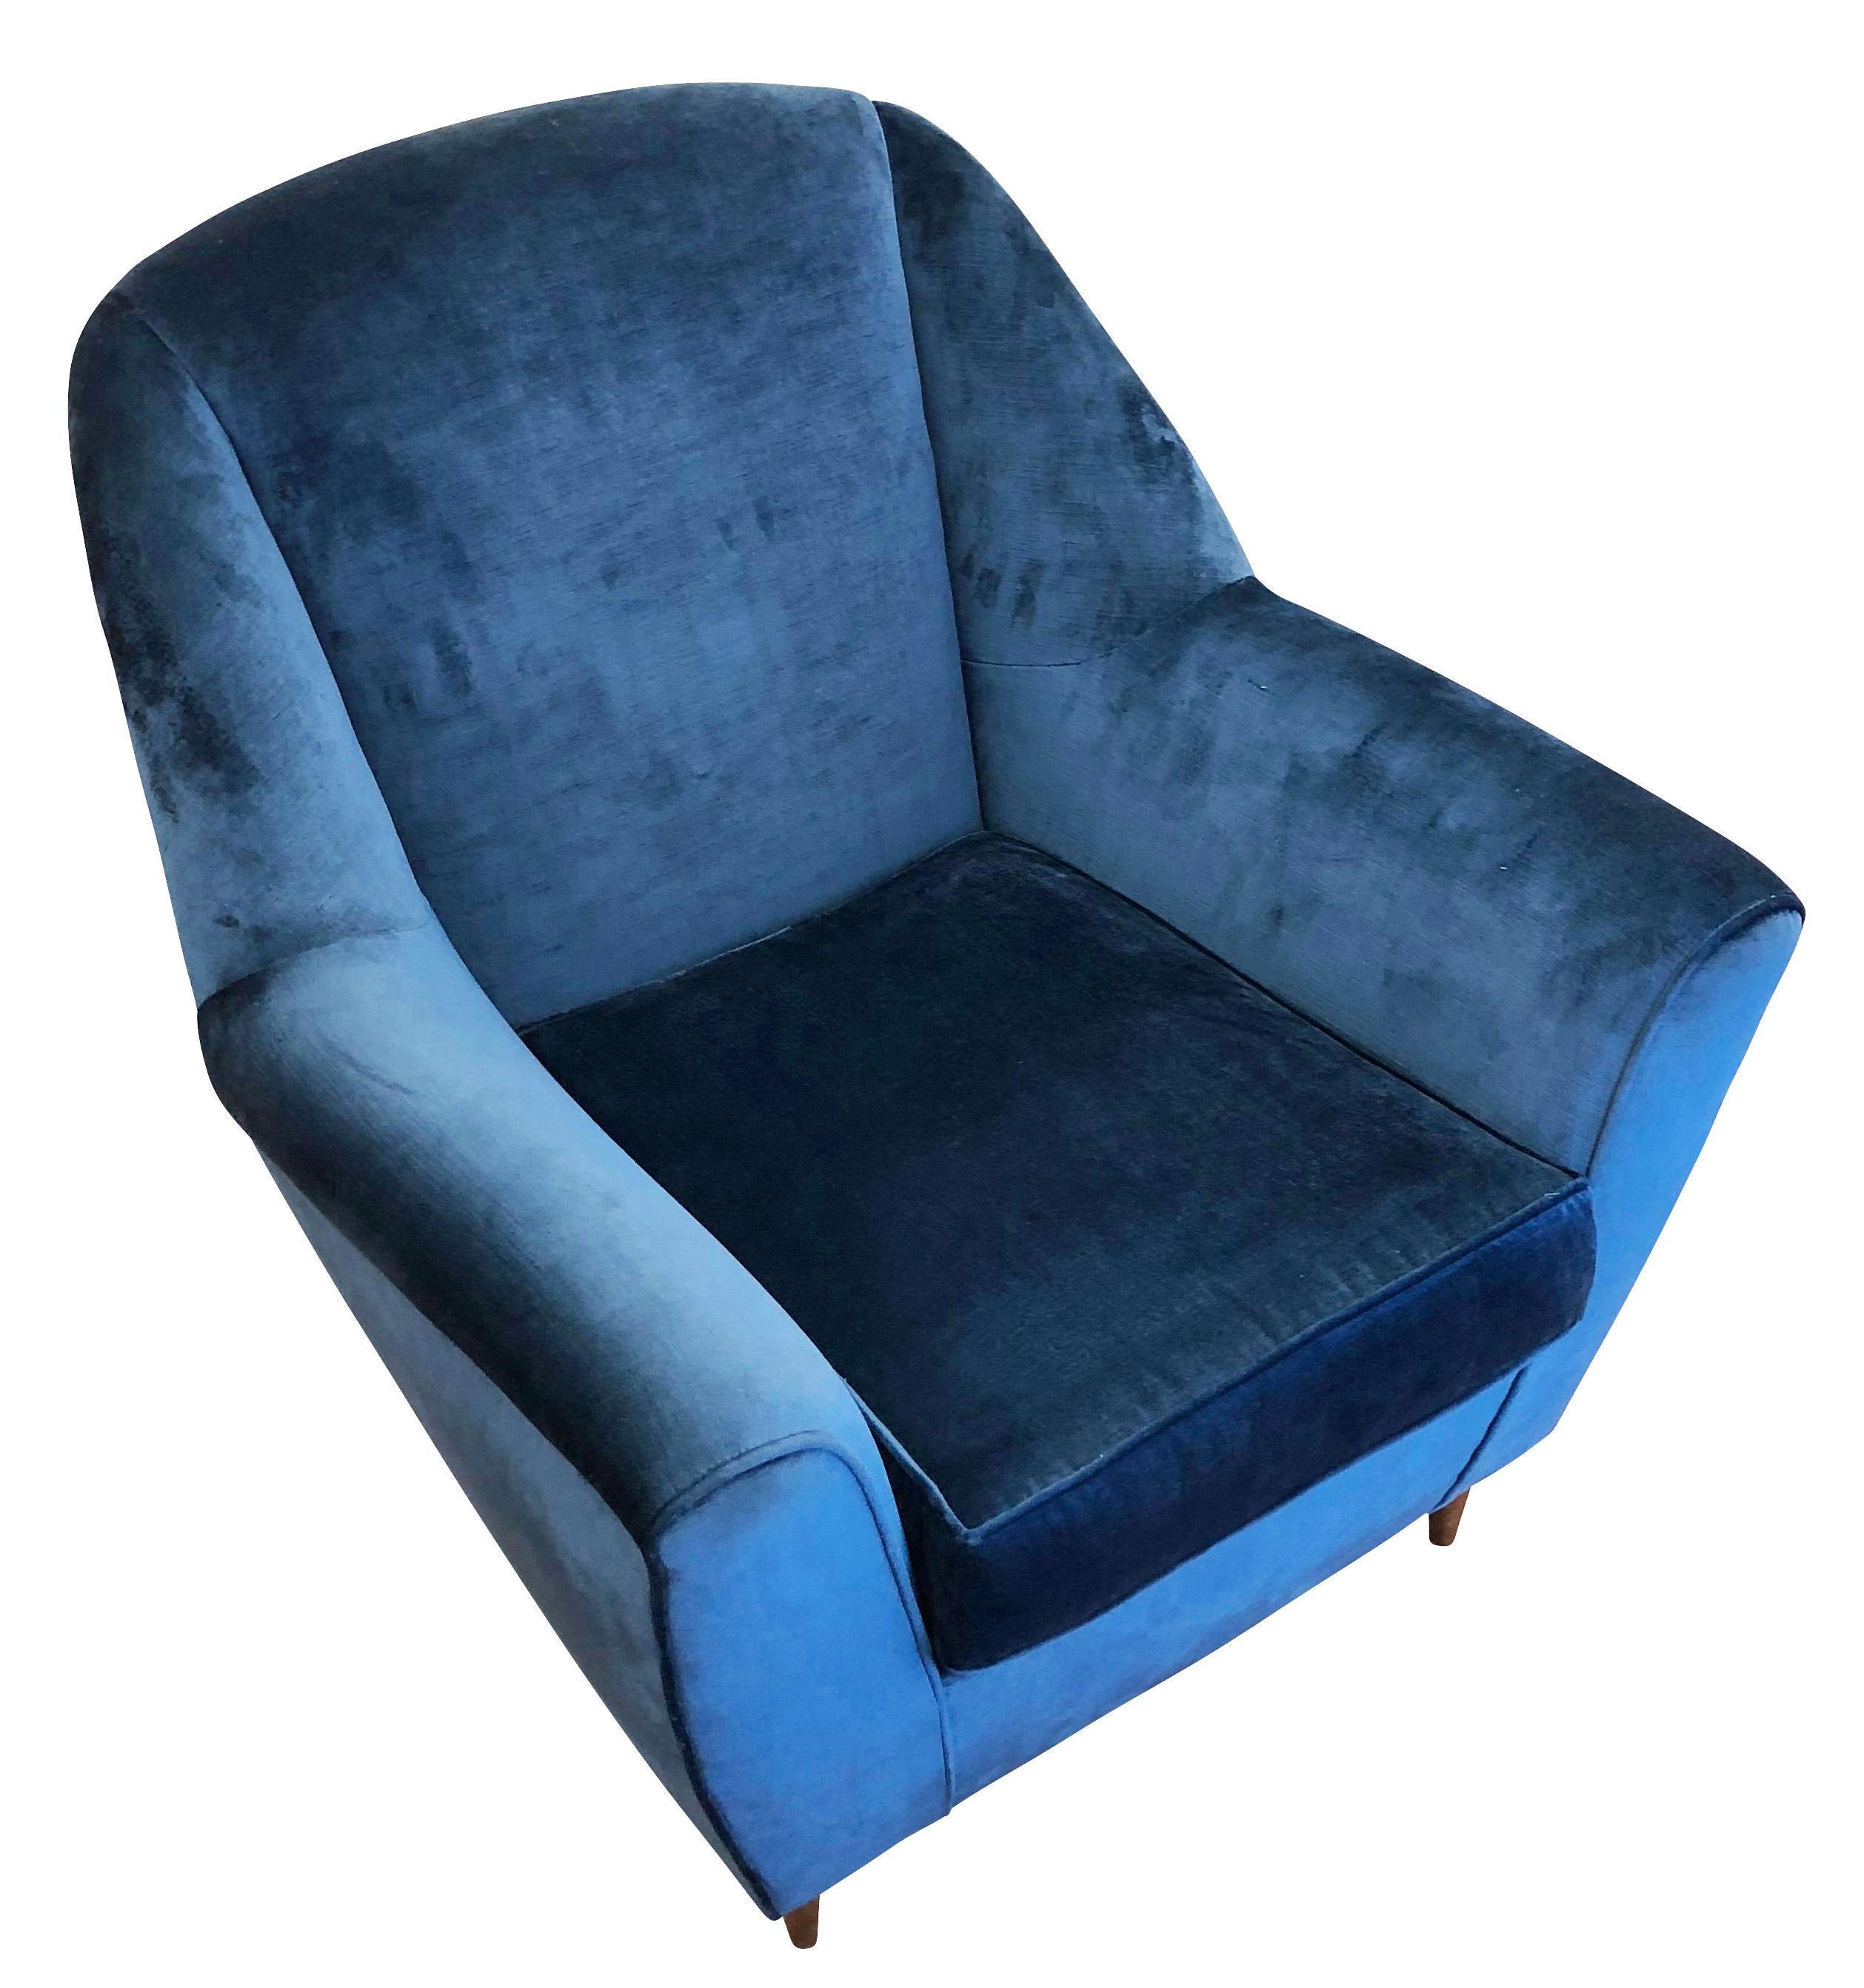 Midcentury lounge chair with a wide seat and slanted back. Original feet are wood but can be replaced with brass ones on request. Has been upholstered in a blue velvet for display purposes. 

Condition: Re-upholstered

Measures: Width